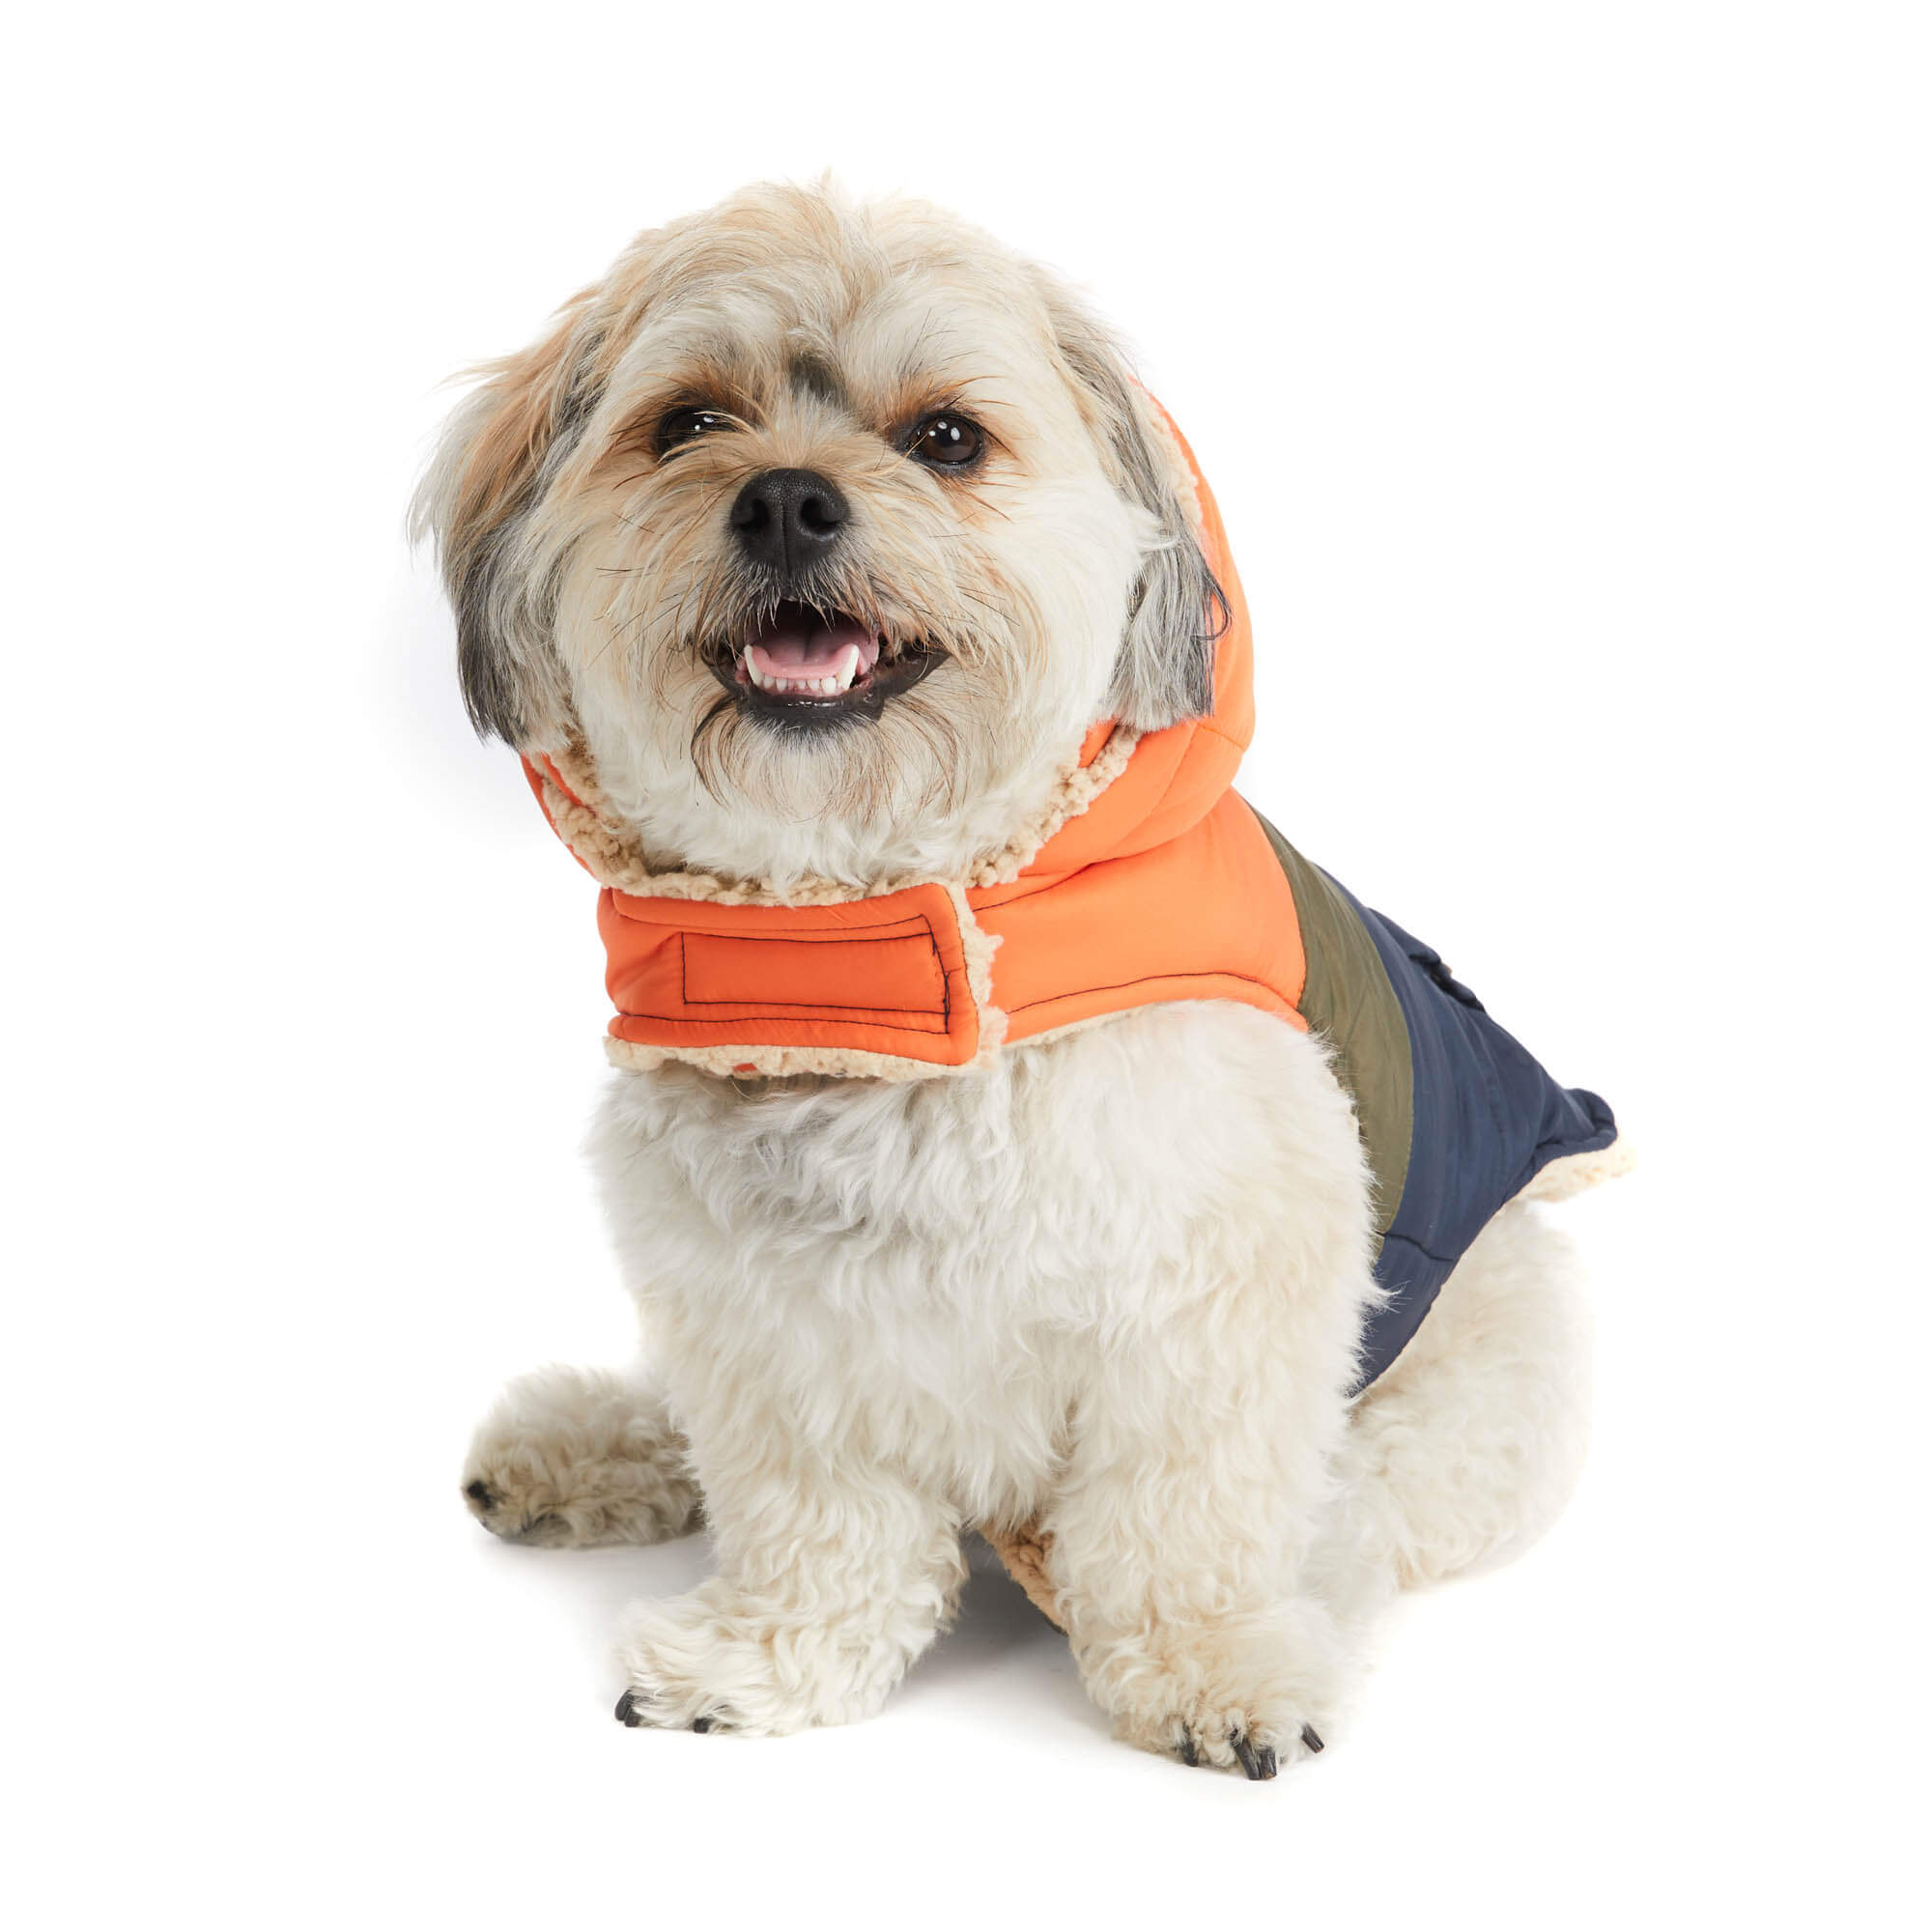 Dog wearing Hotel Doggy orange and blue parka. Front view